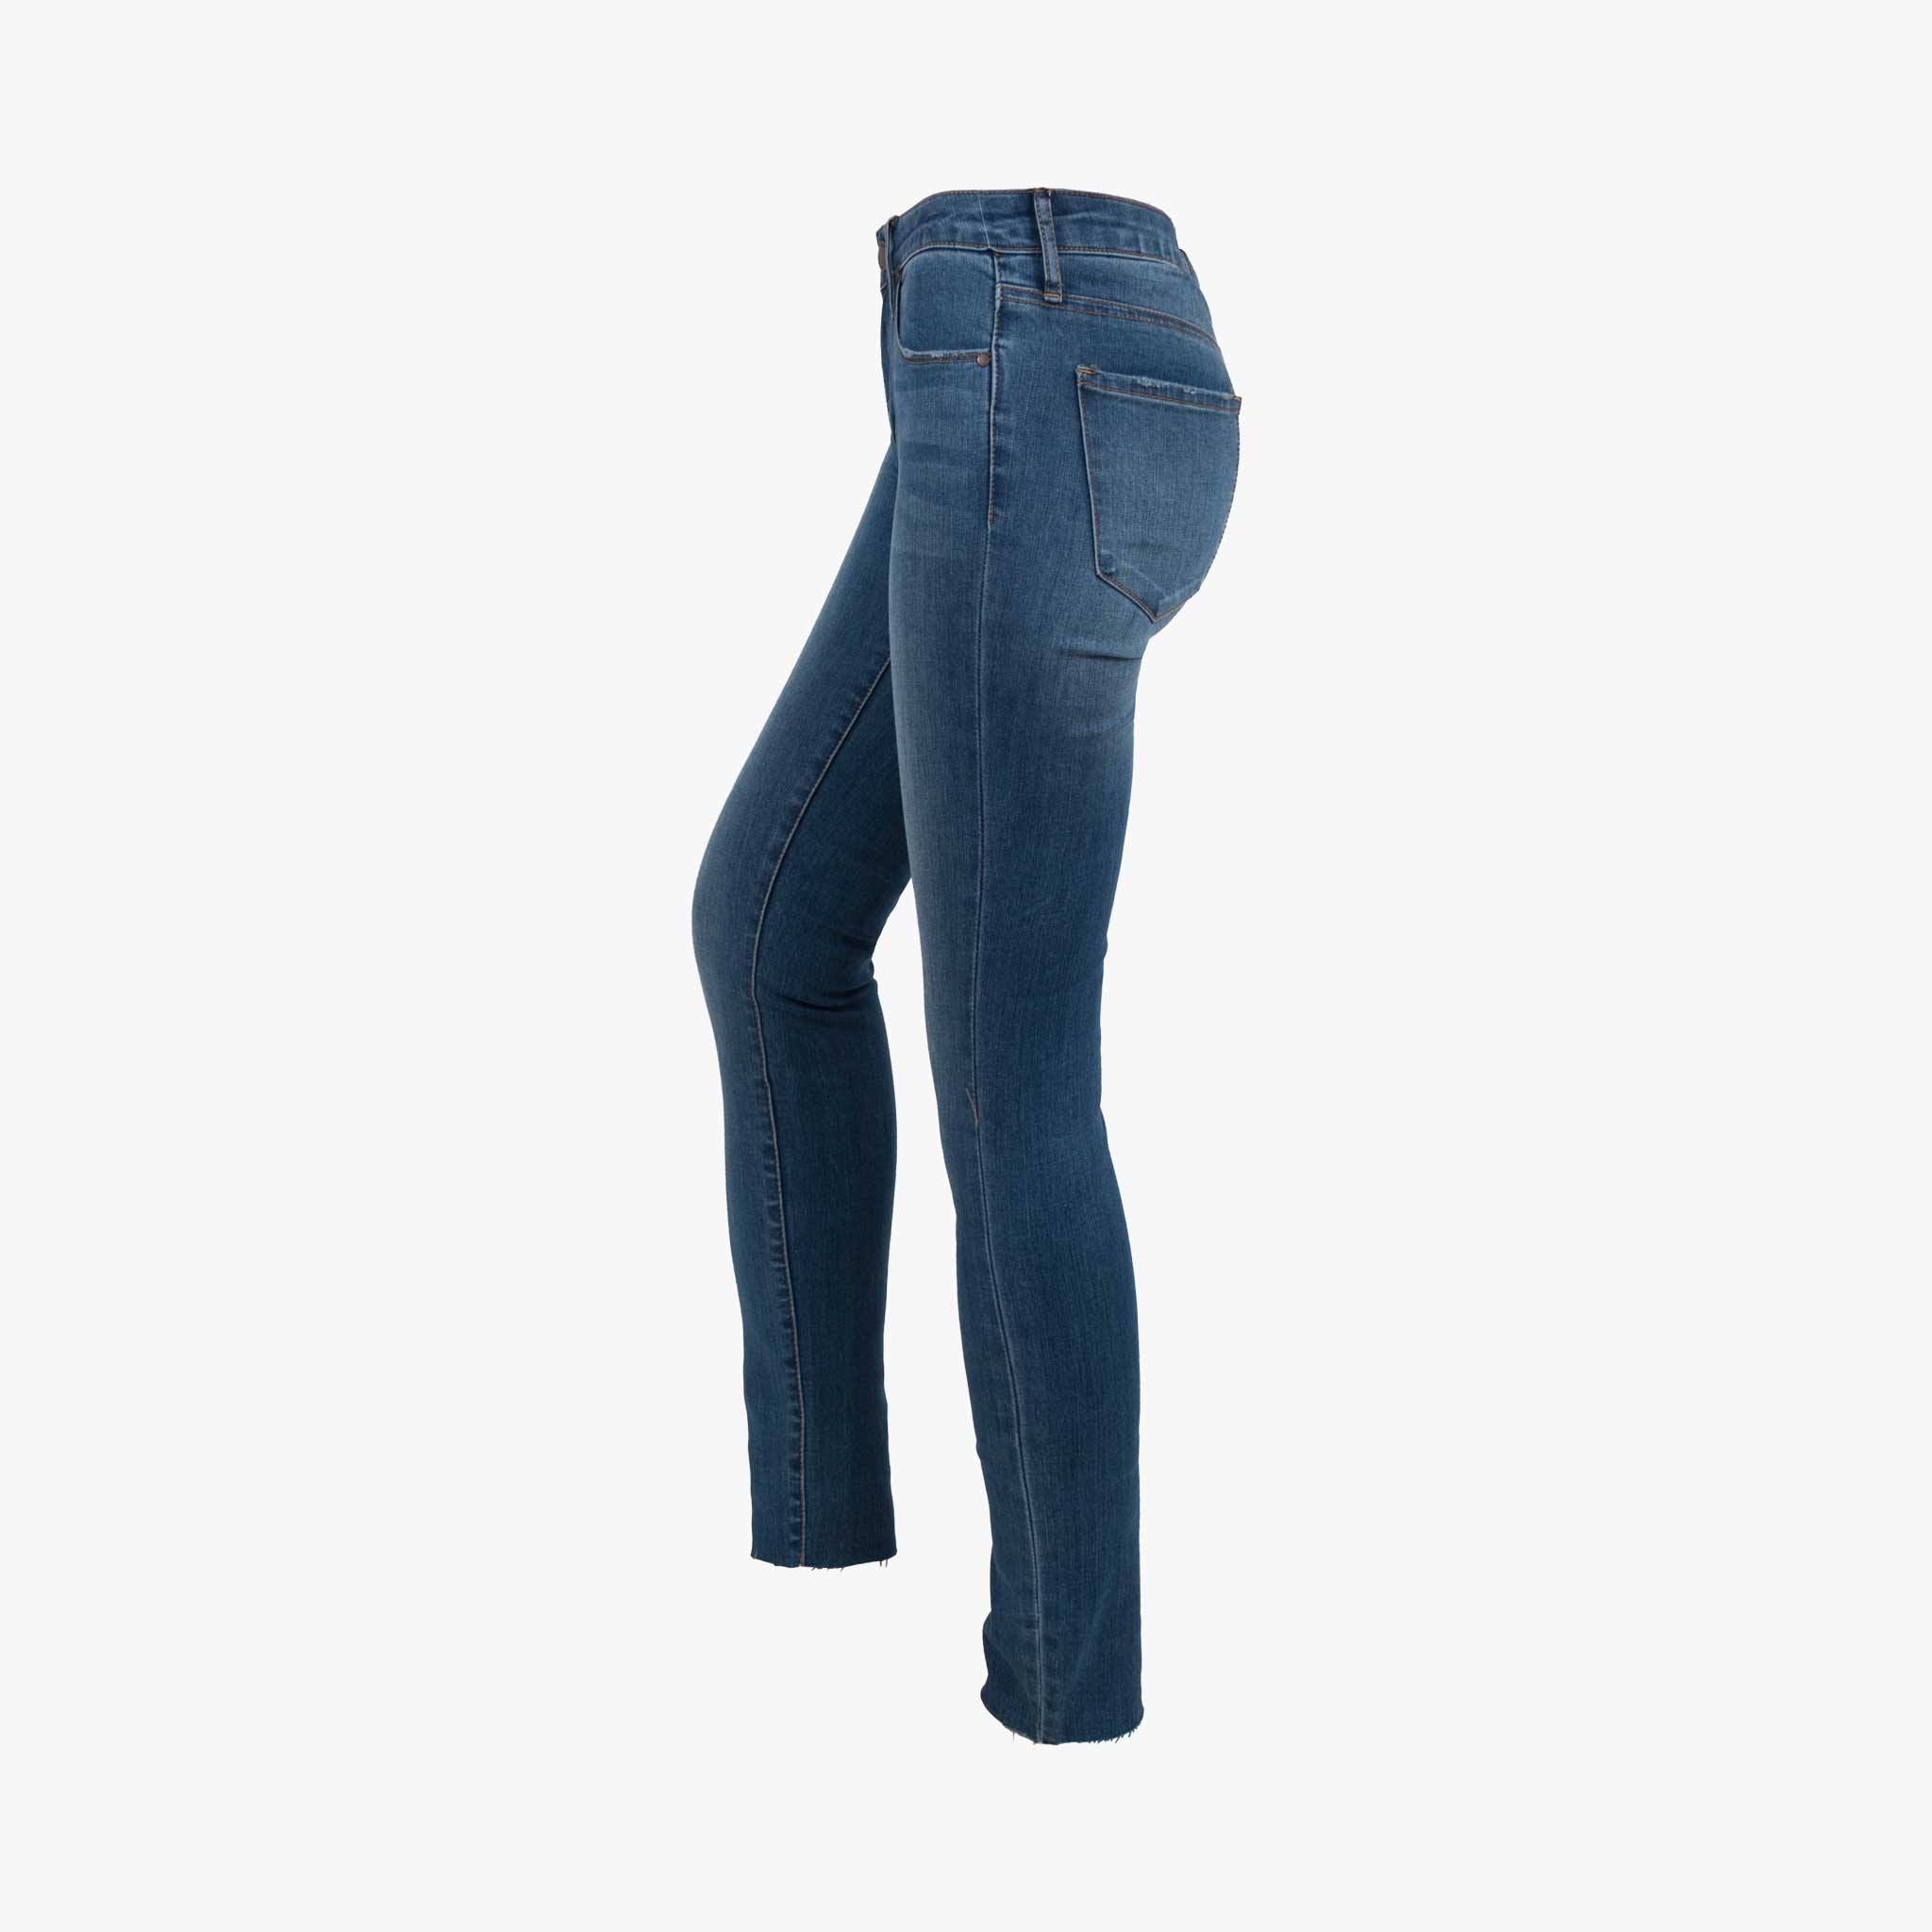 Aticles of society Jeans Carly Crop | denim